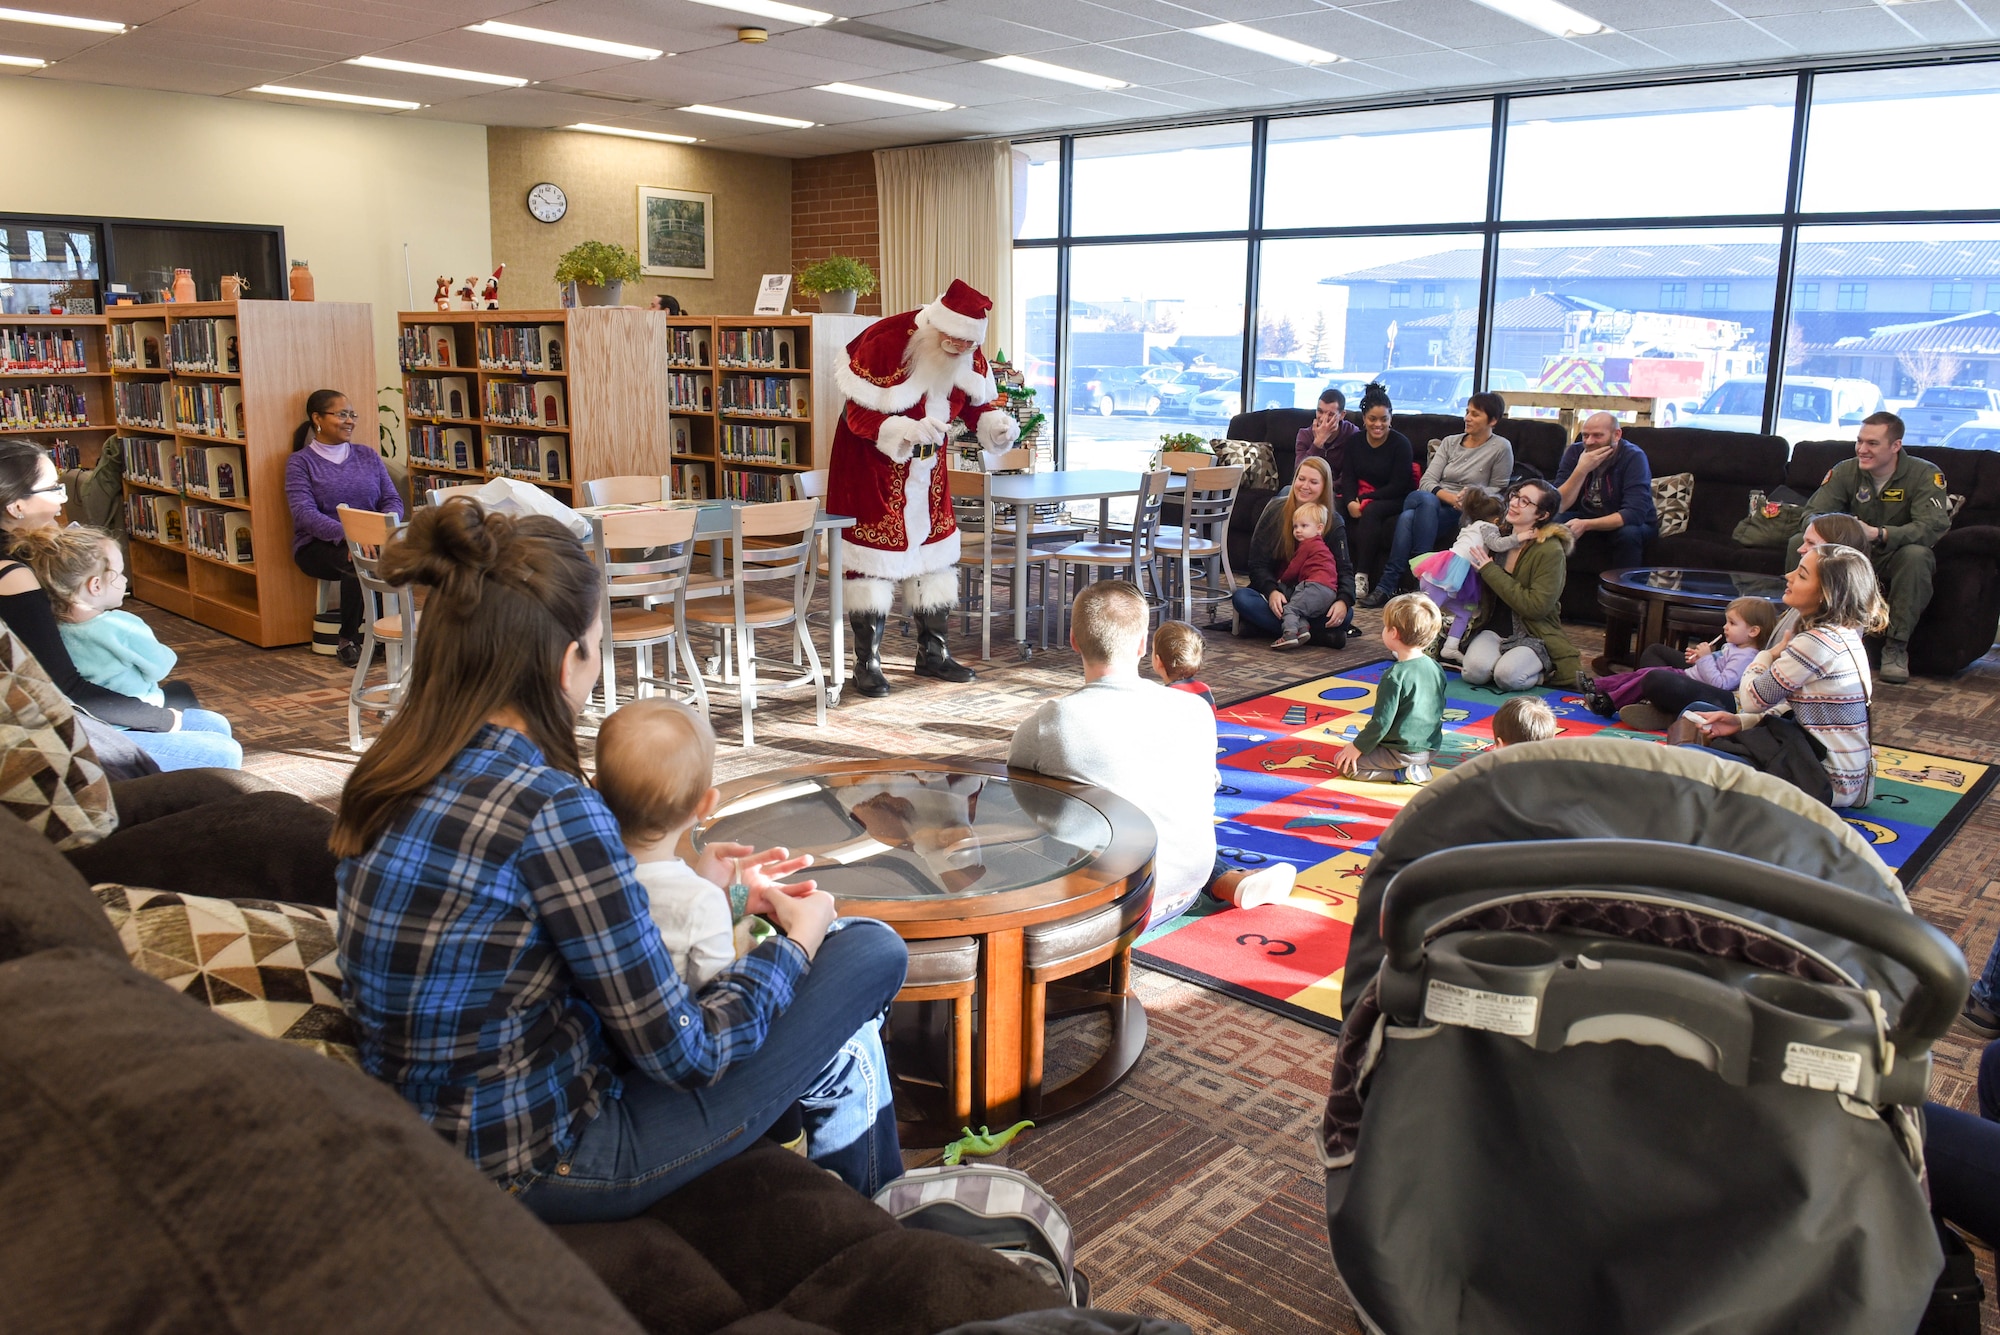 Santa Claus speaks to children at the Holbrook Library on Ellsworth Air Force Base, S.D., Dec. 13, 2018. Just 12 days prior his adventures on Christmas Eve, Santa took the time to spread holiday cheer with the children of Ellsworth AFB. (U.S. Air Force photo by Airman John Ennis)